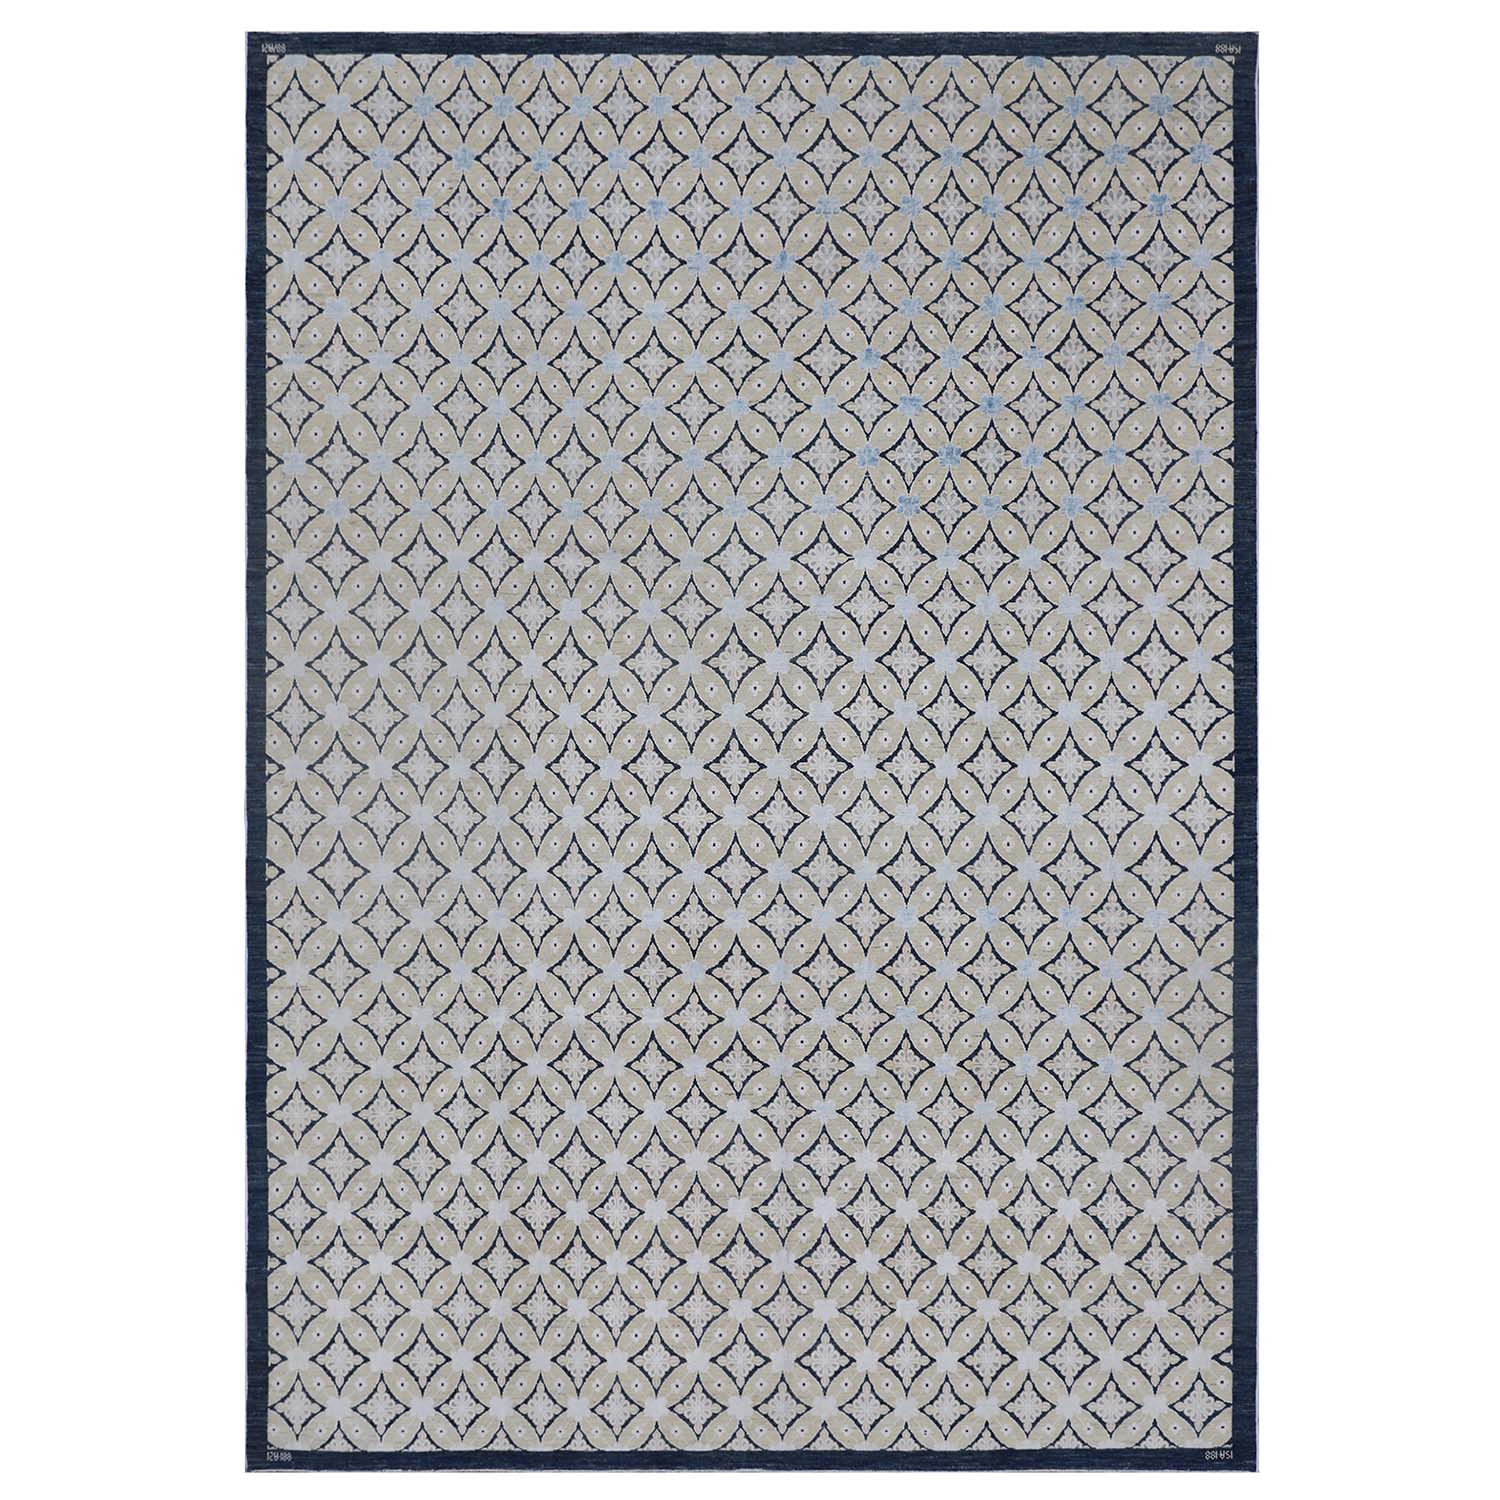 Contemporary rectangular area rug with geometric pattern in neutral colors.